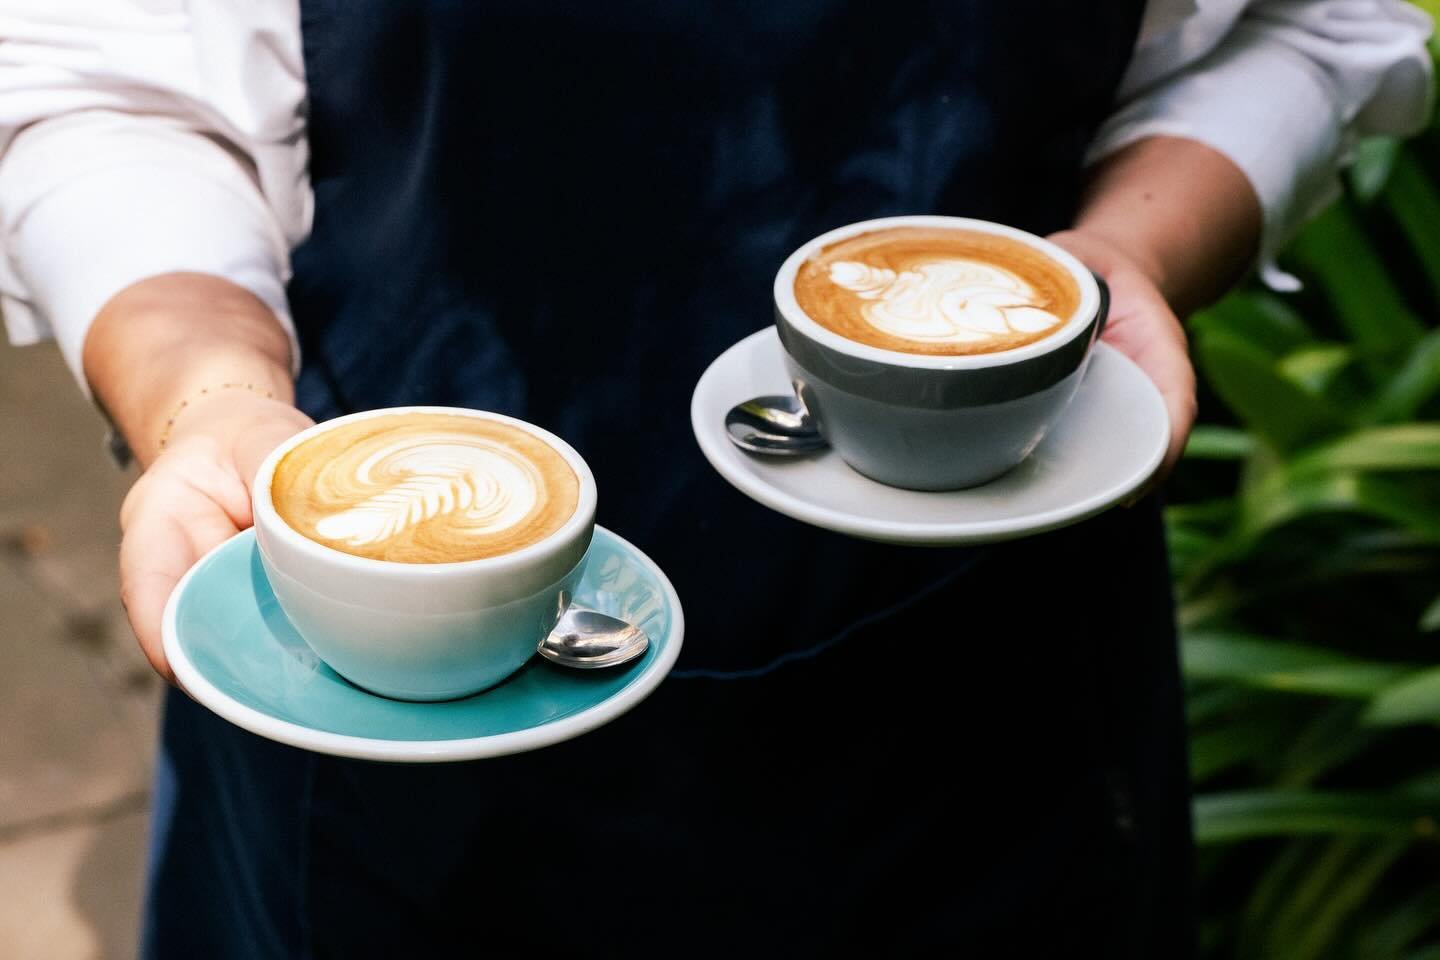 Who&rsquo;s in need of a damn good coffee?
Treasury 1860 is open weekdays from 6:30am, and 8am weekends, serving the amazing locally roasted @uptowncoffeeroasters @kiccocoffee.
Pop in on your way to work for your morning cup of happiness!

#coffeeade